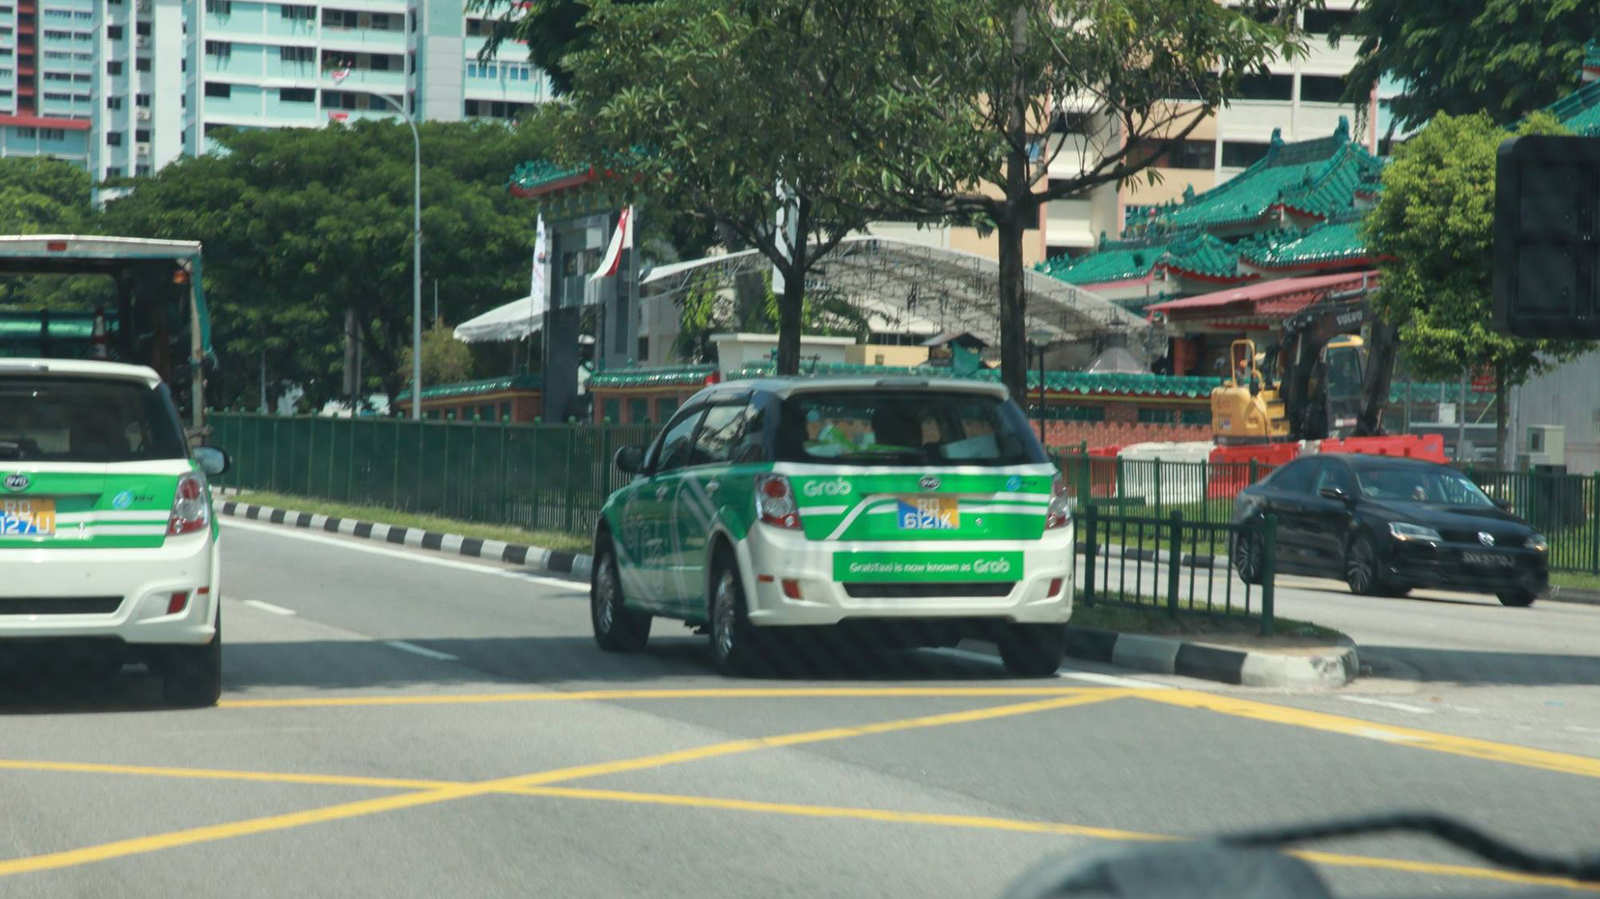 Grab driver or passenger, a little kindness and patience could make your trip more pleasant